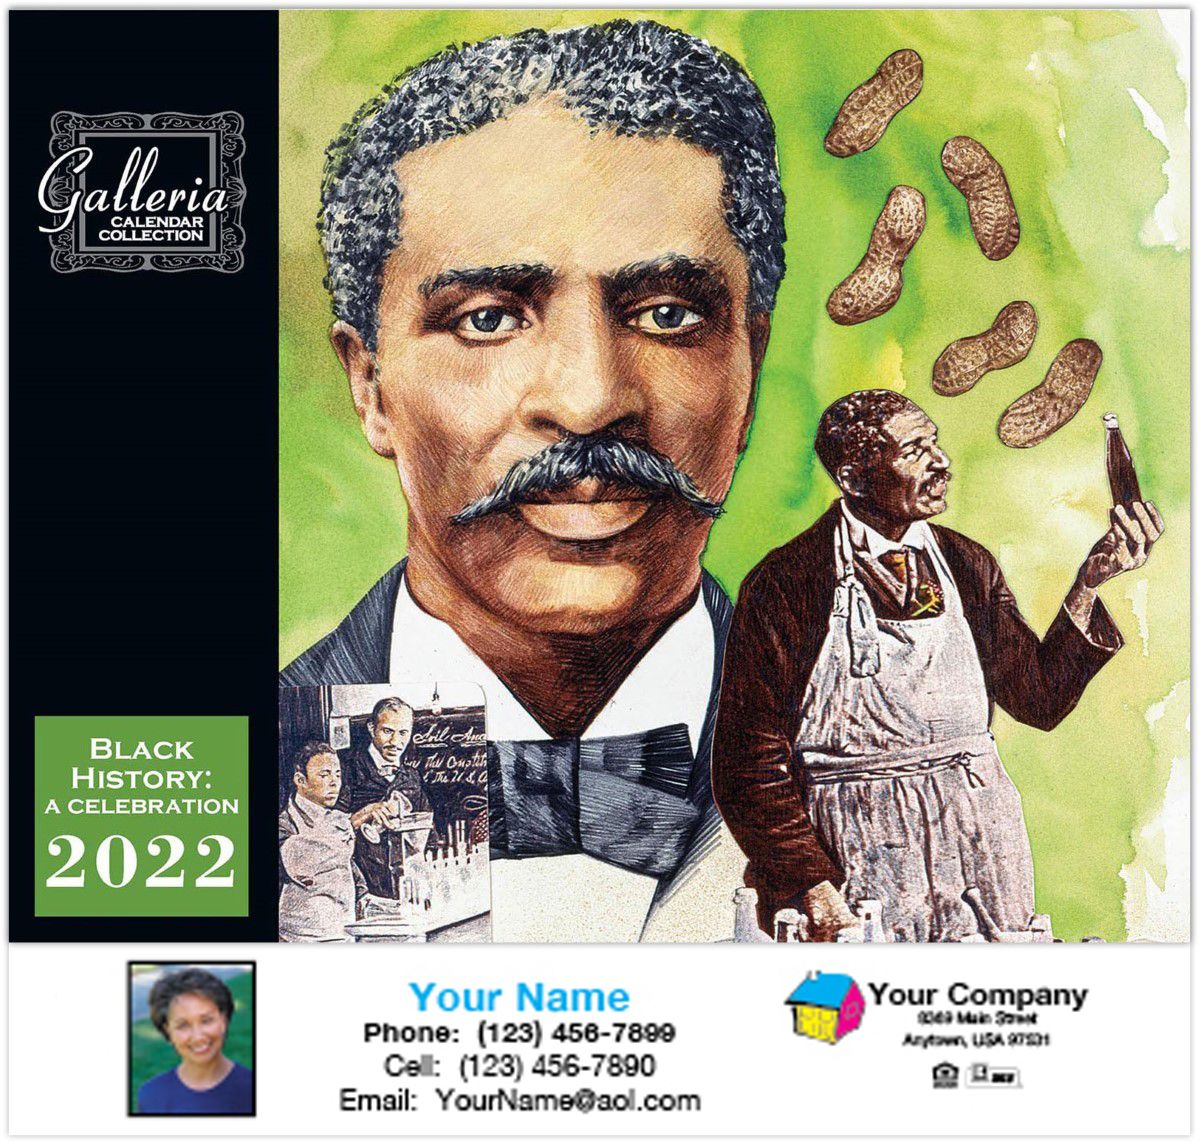 ReaMark Products: Black History